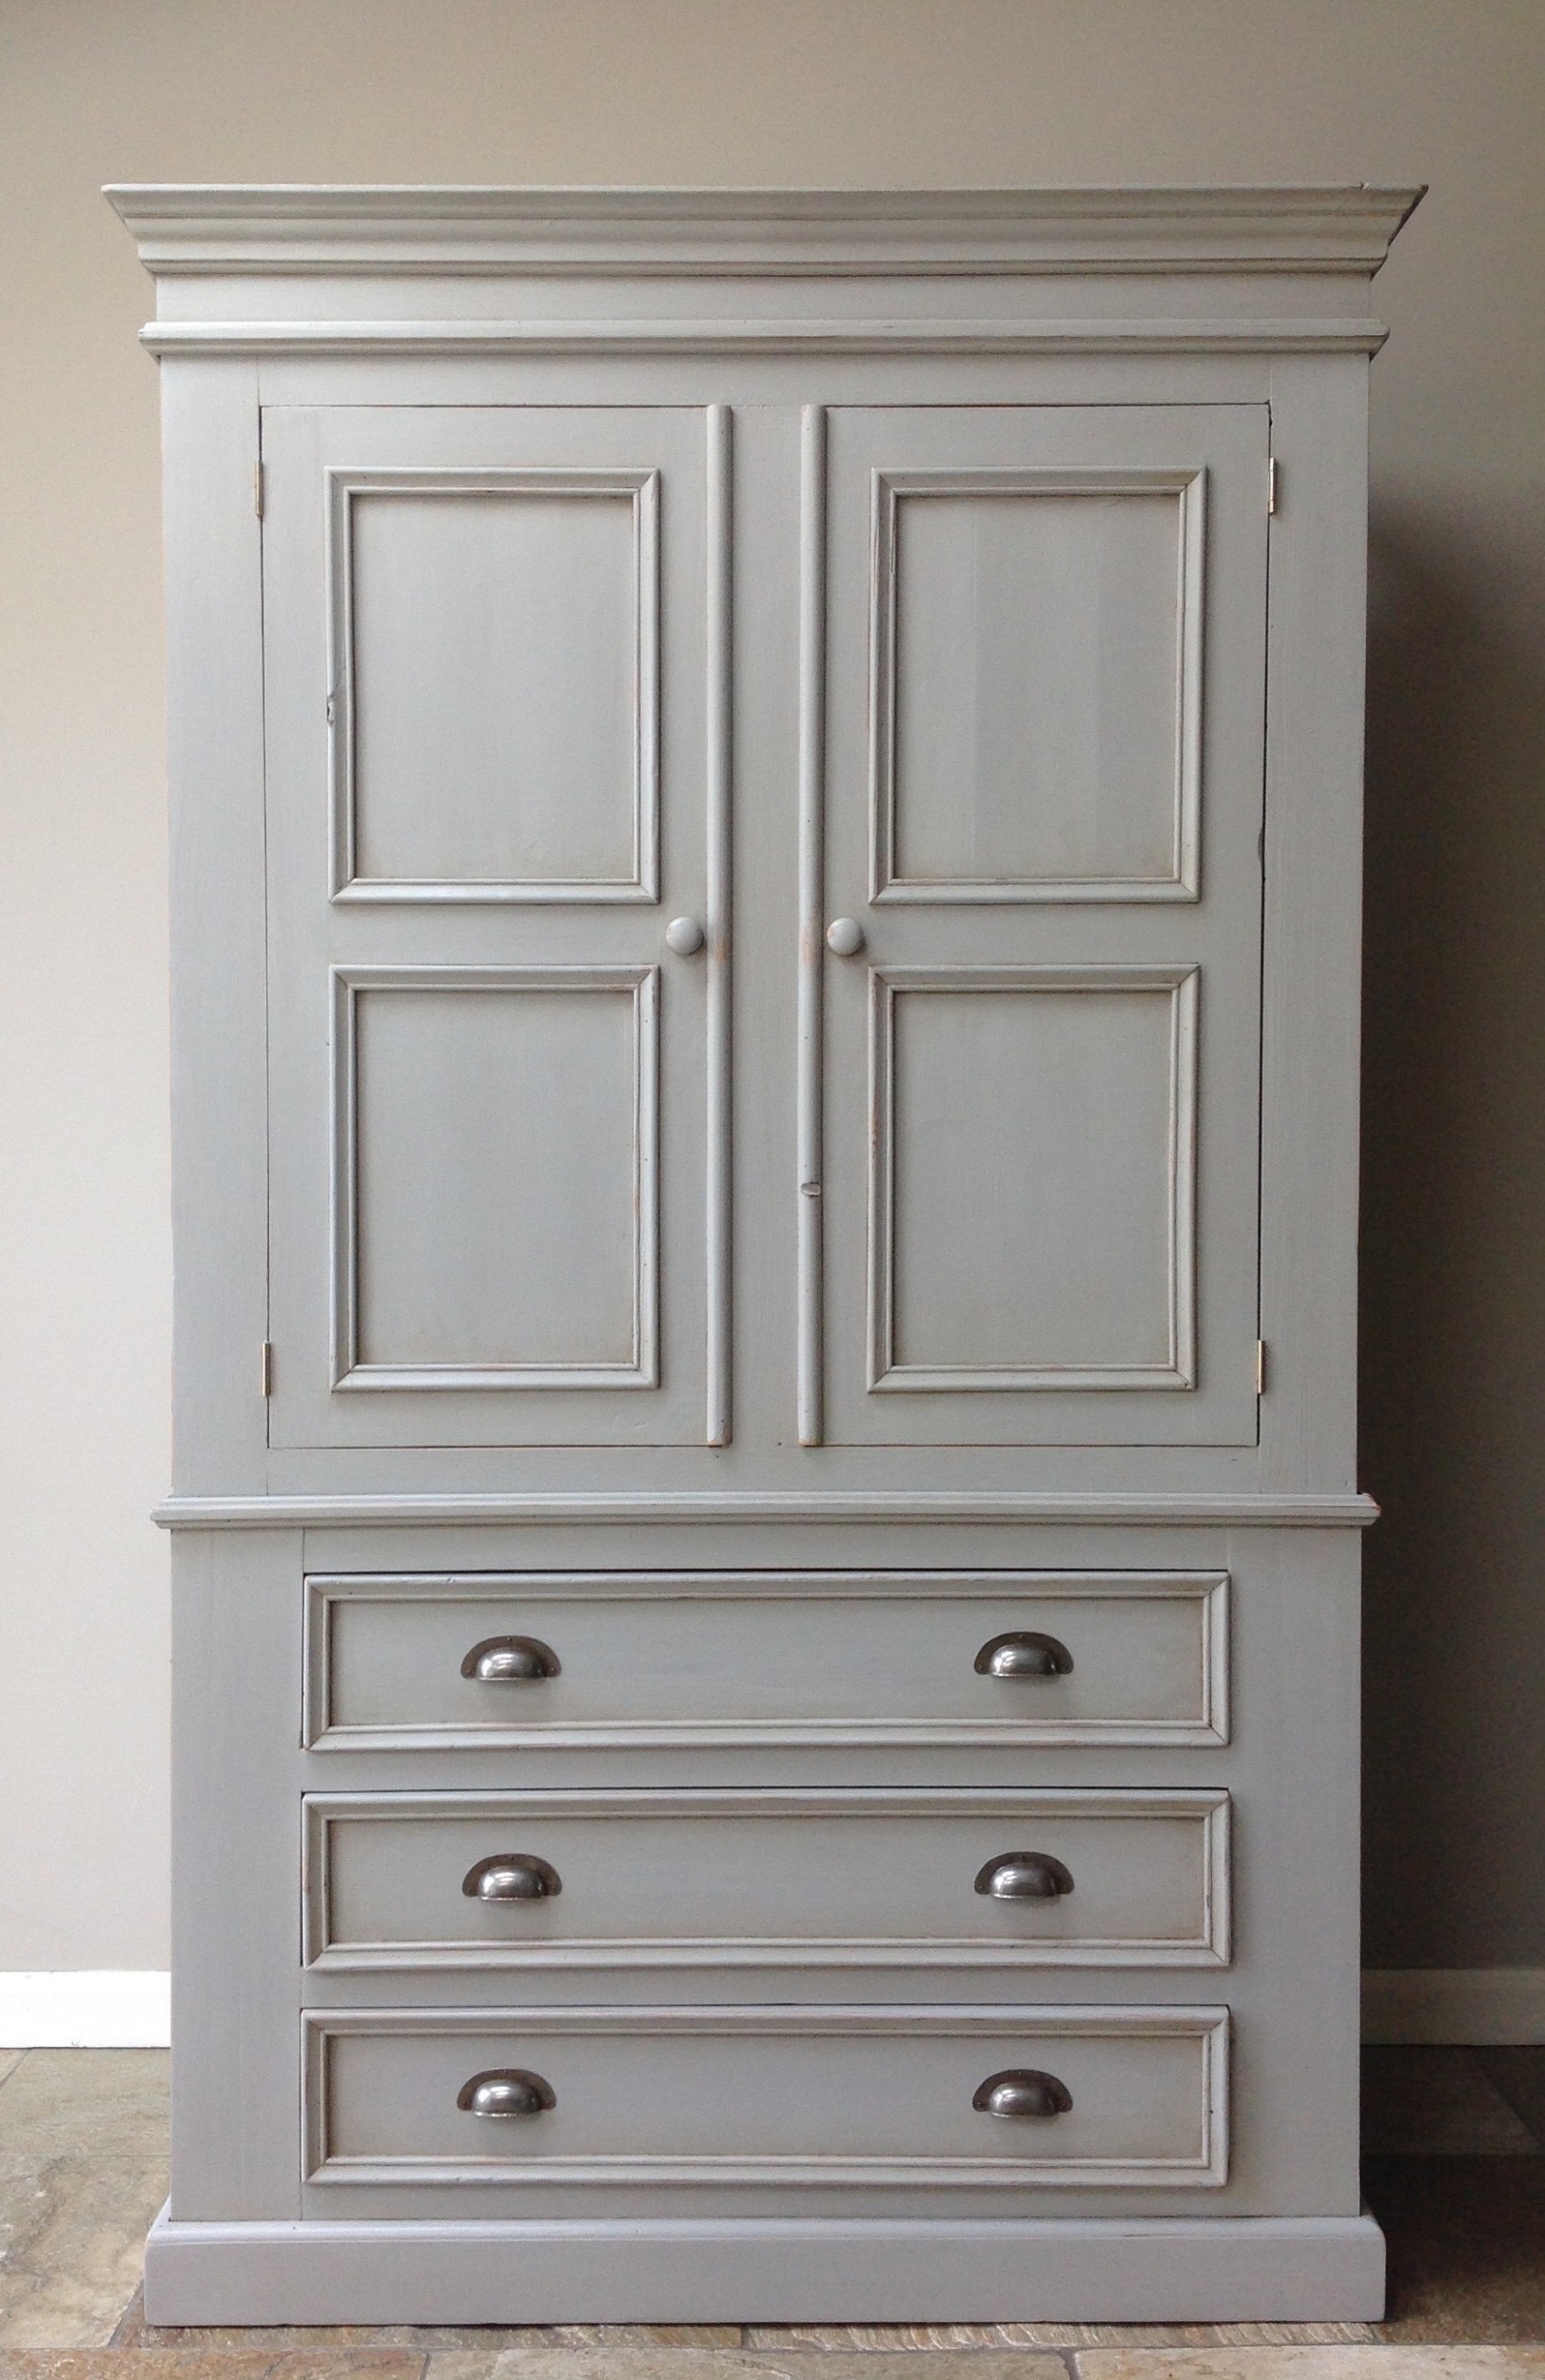 Vintage Farmhouse Country Rustic Painted Grey Wardrobe Linen Press Solid Pine Hall Cupboard Cottage Chic Annie Sloan Chalk Paint Paris Grey Annie Sloan Chalk Paint Reers Uk